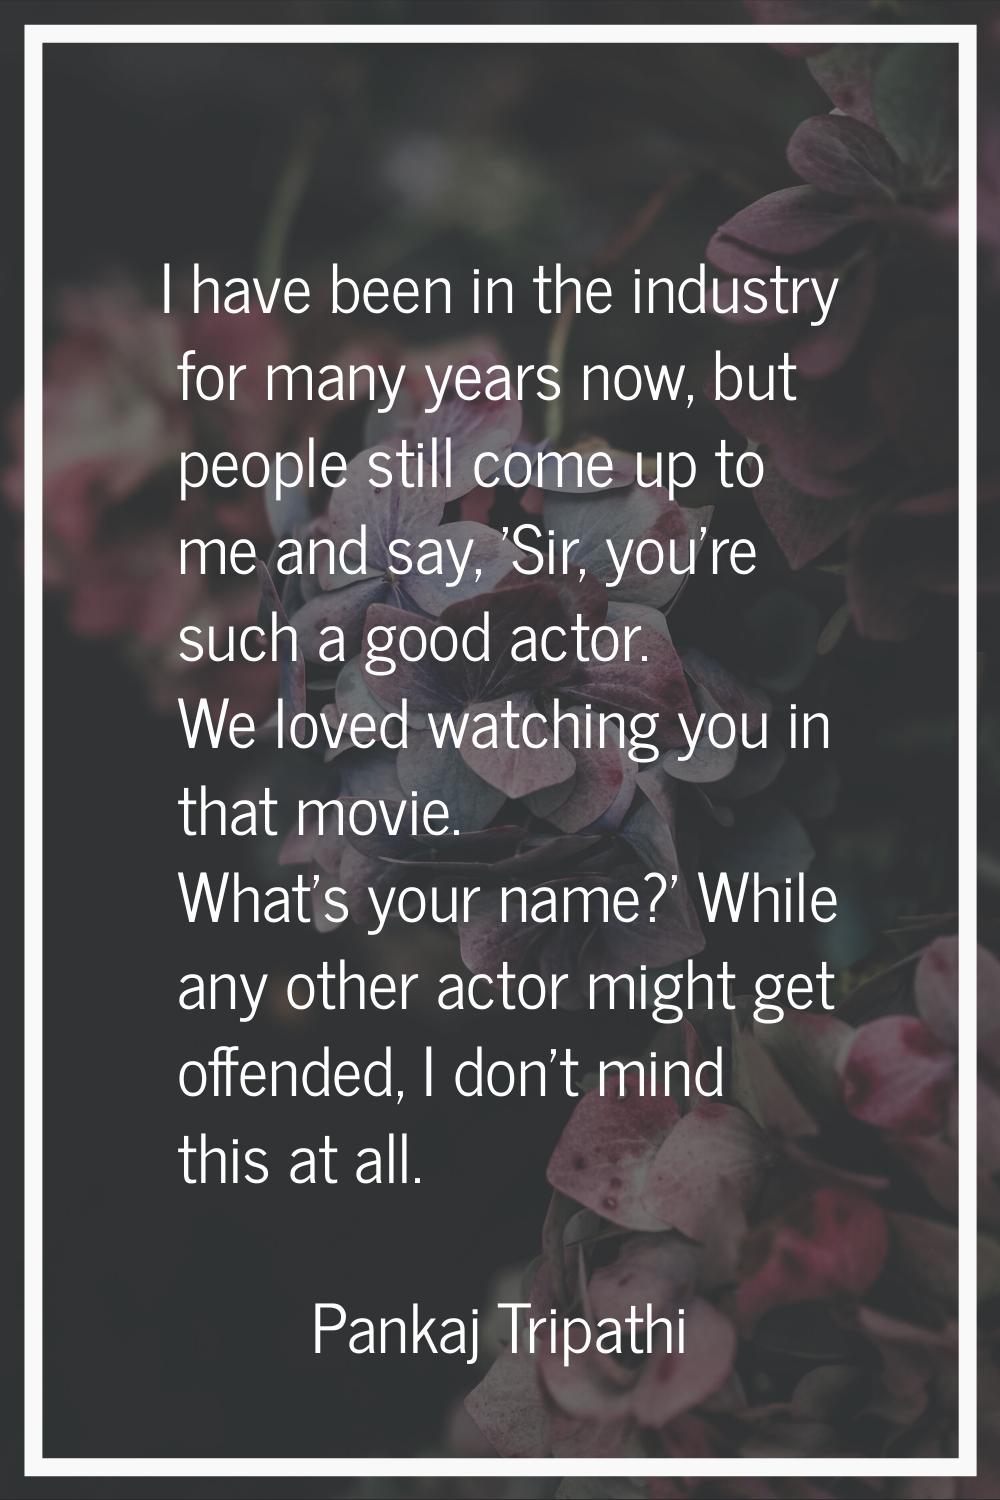 I have been in the industry for many years now, but people still come up to me and say, 'Sir, you'r